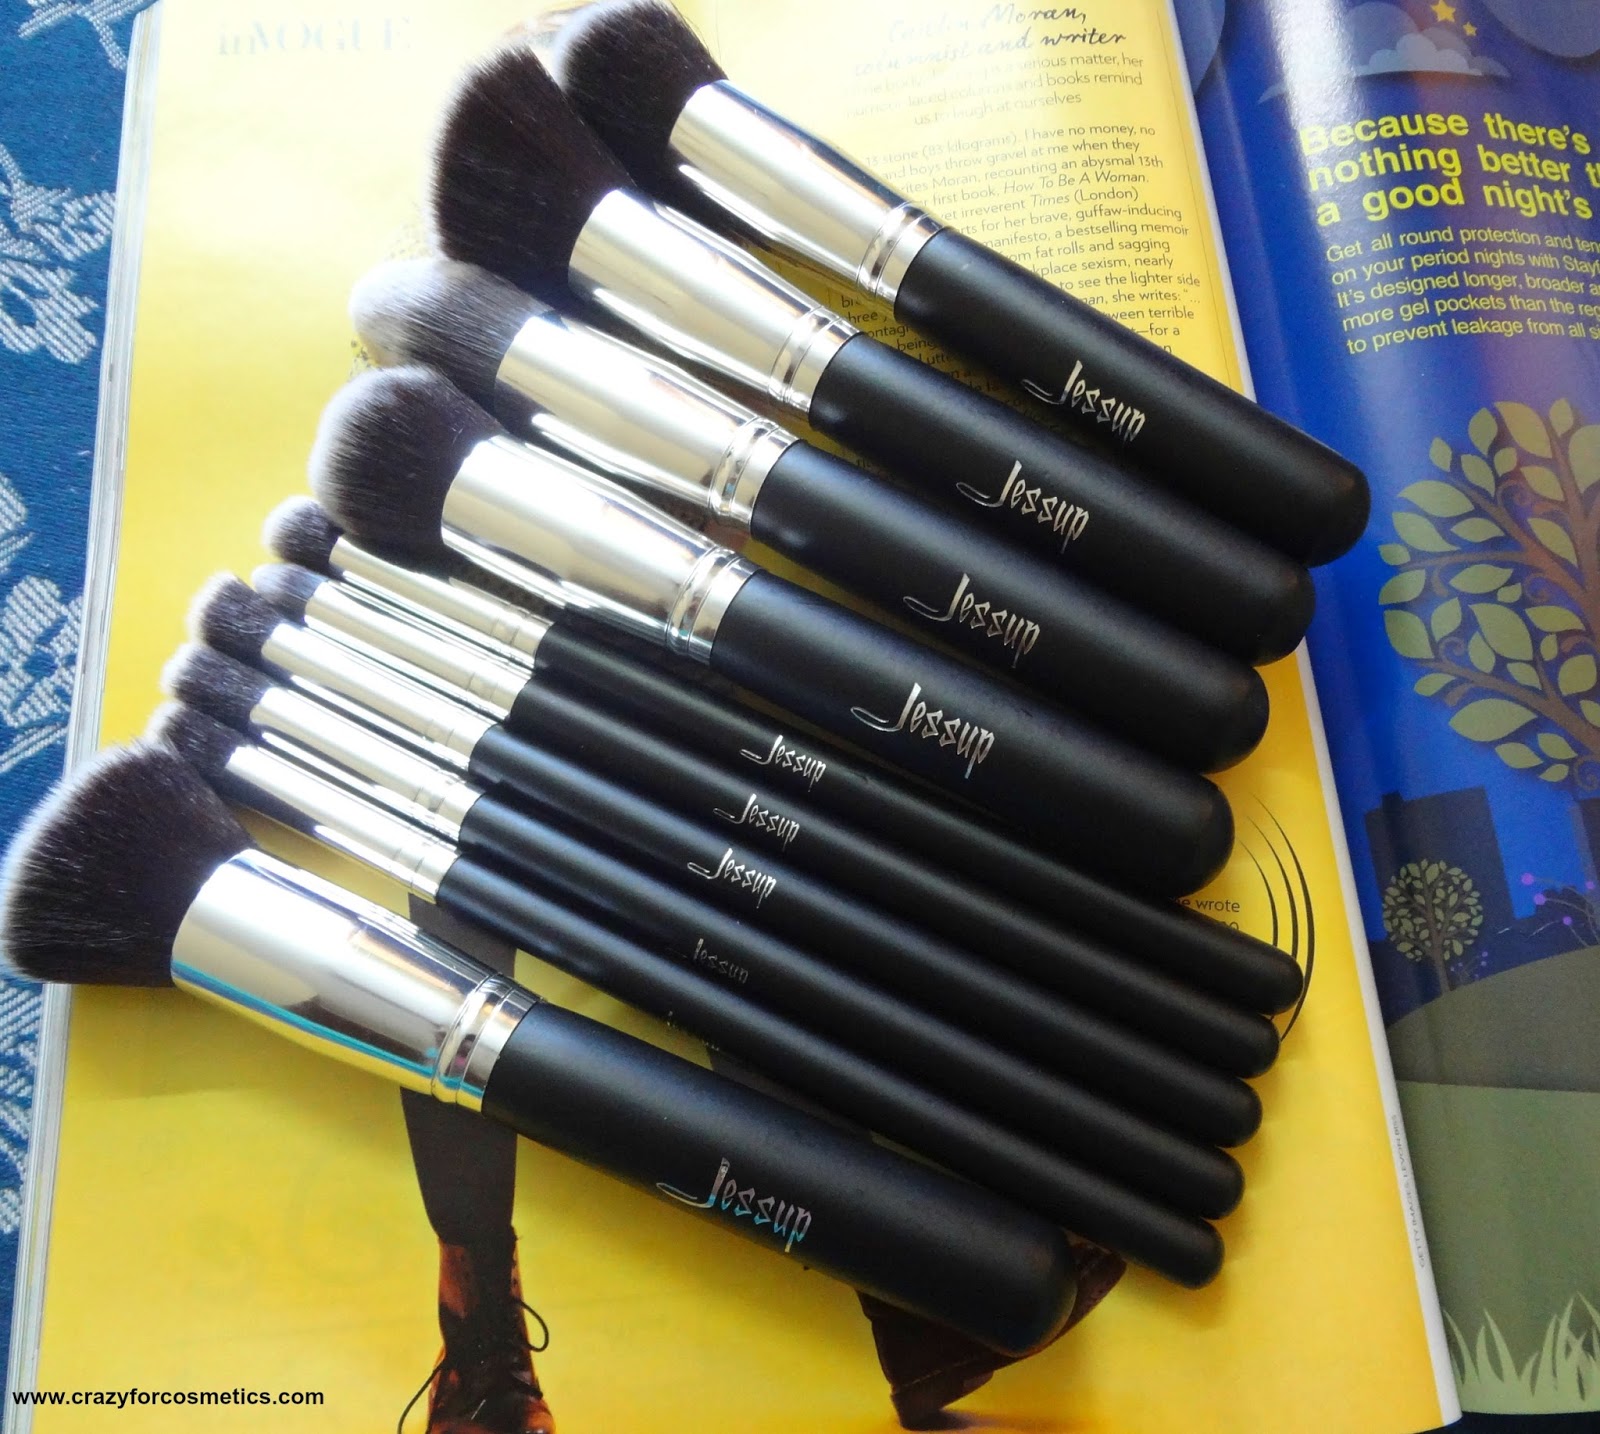 Makeup Brushes Haul from EBay - First Impression and Pictures | Crazy